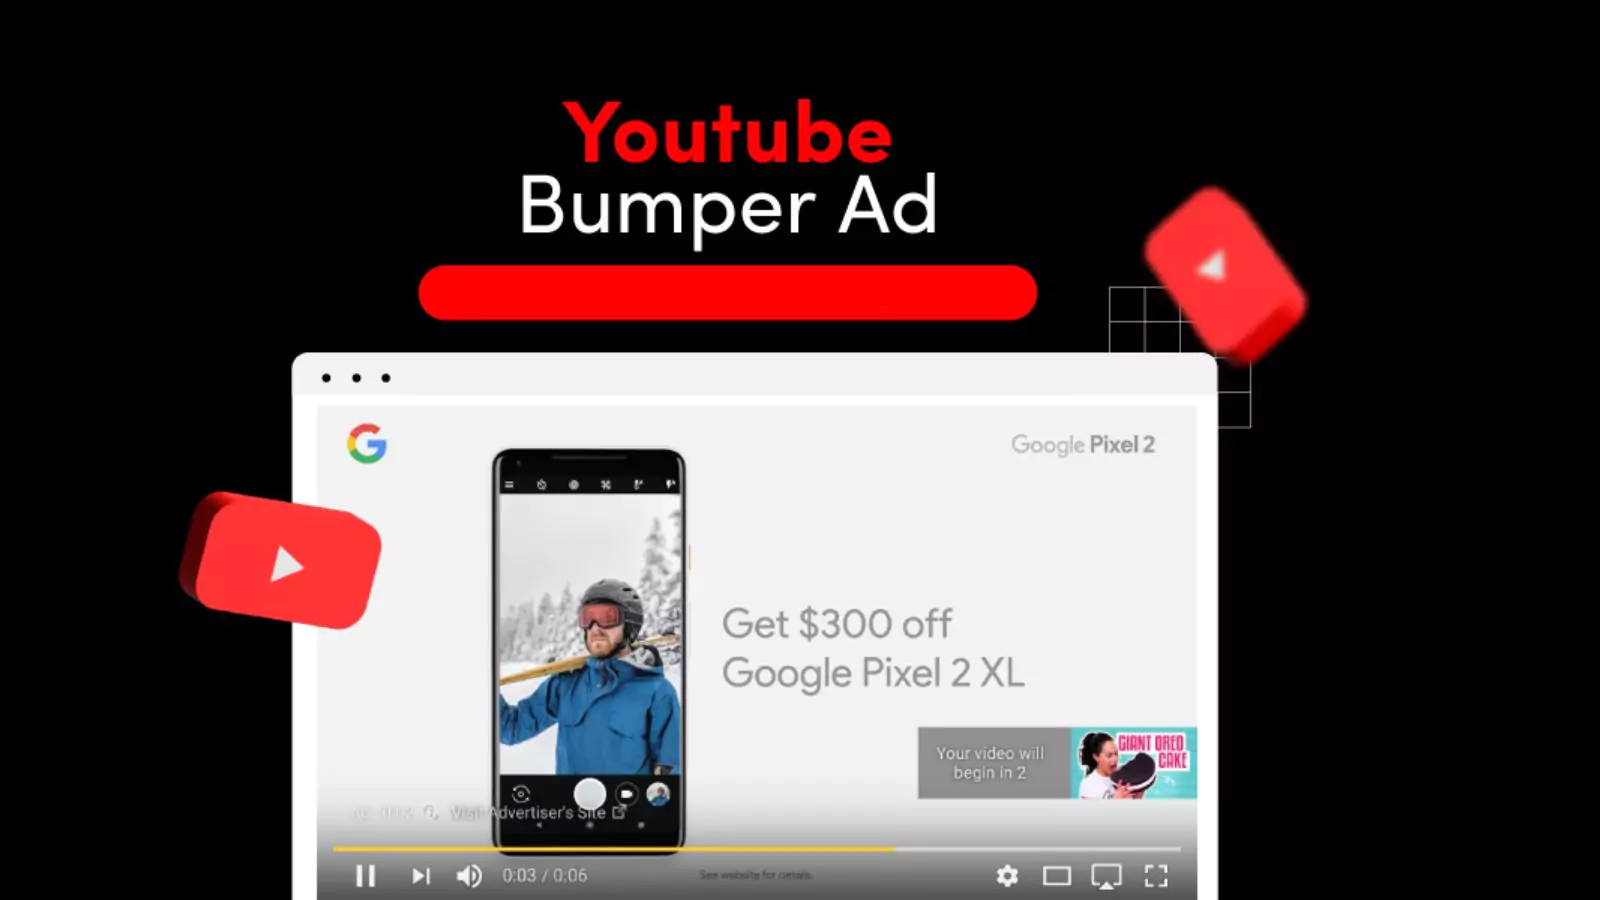 youtube-ad-format-bumper-ads